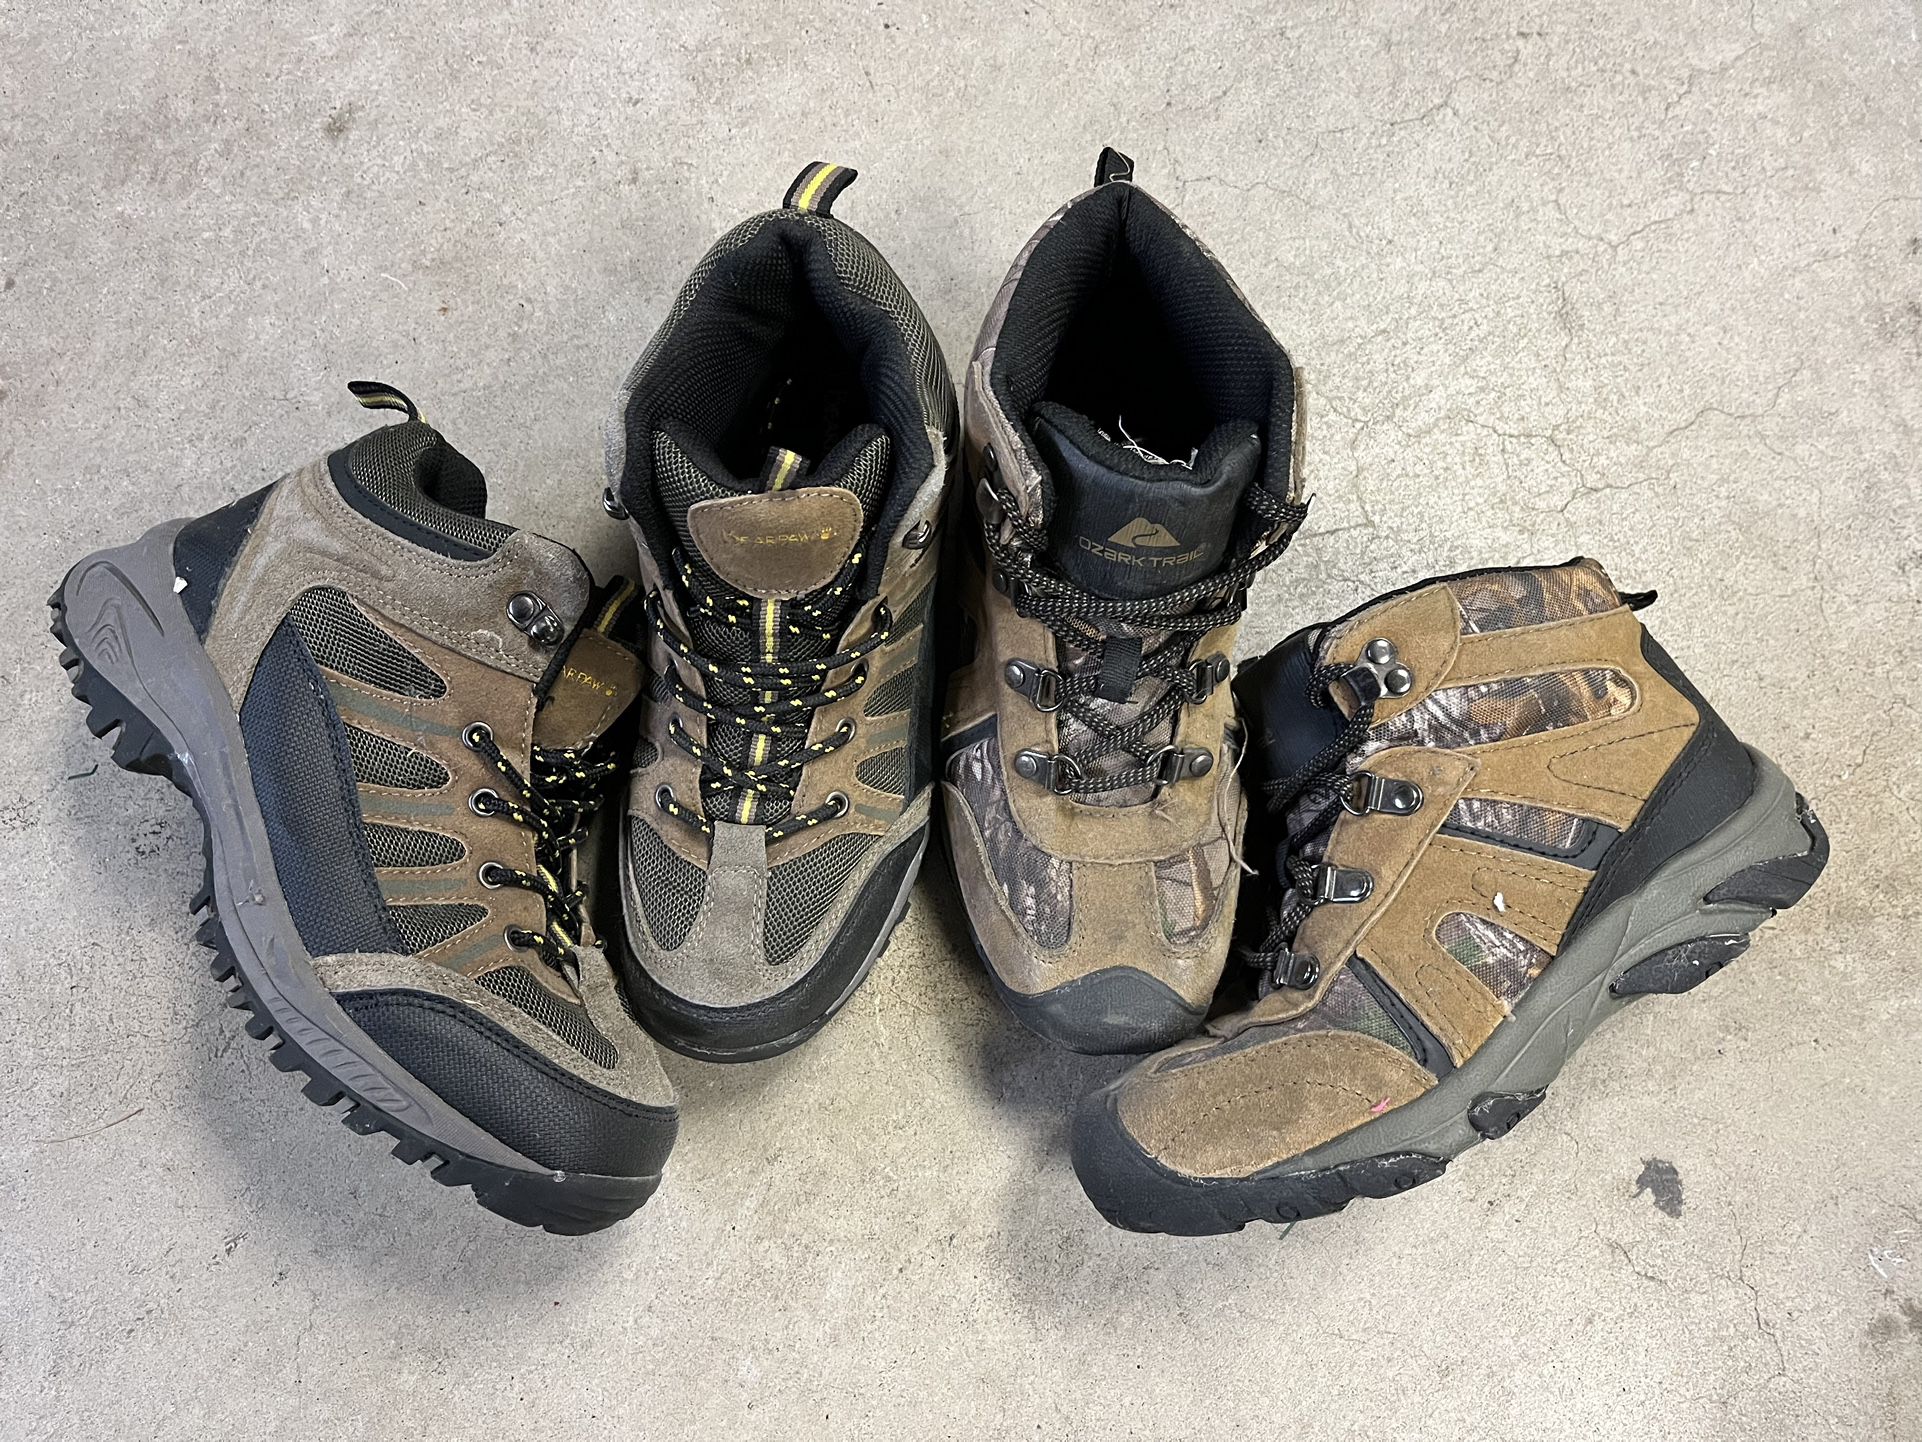 Hiking Boots Sizes 5.5y And 4y